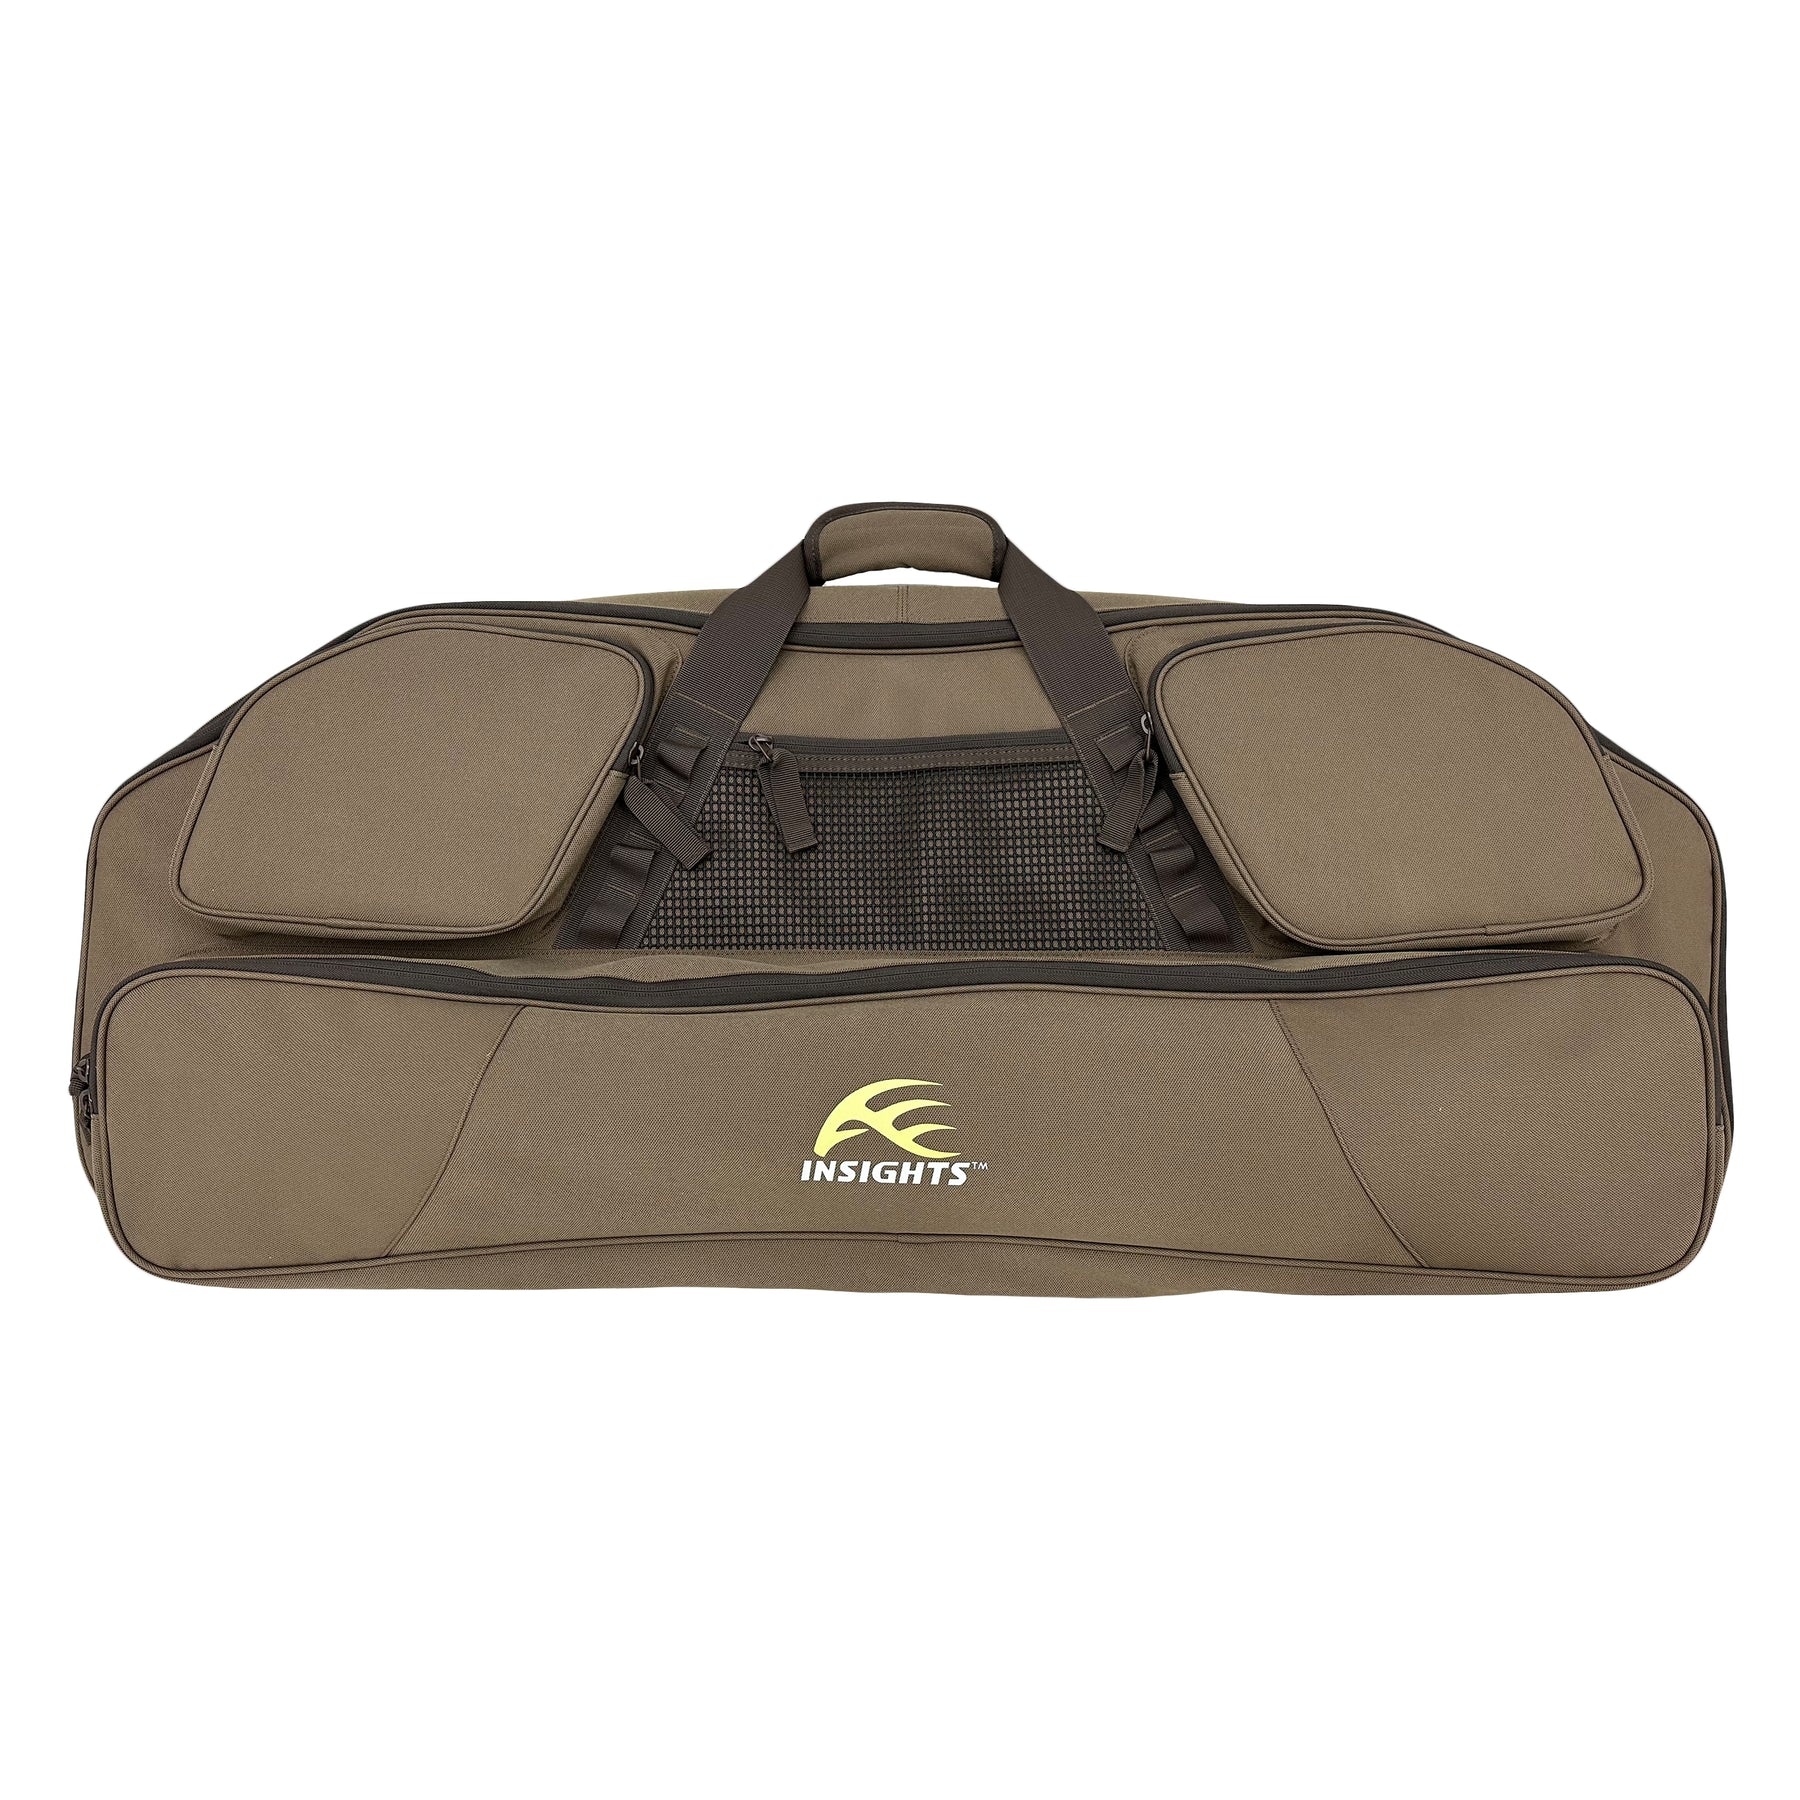 ISH9106-321 - Insights Soft Bow Case – Insights Outdoors